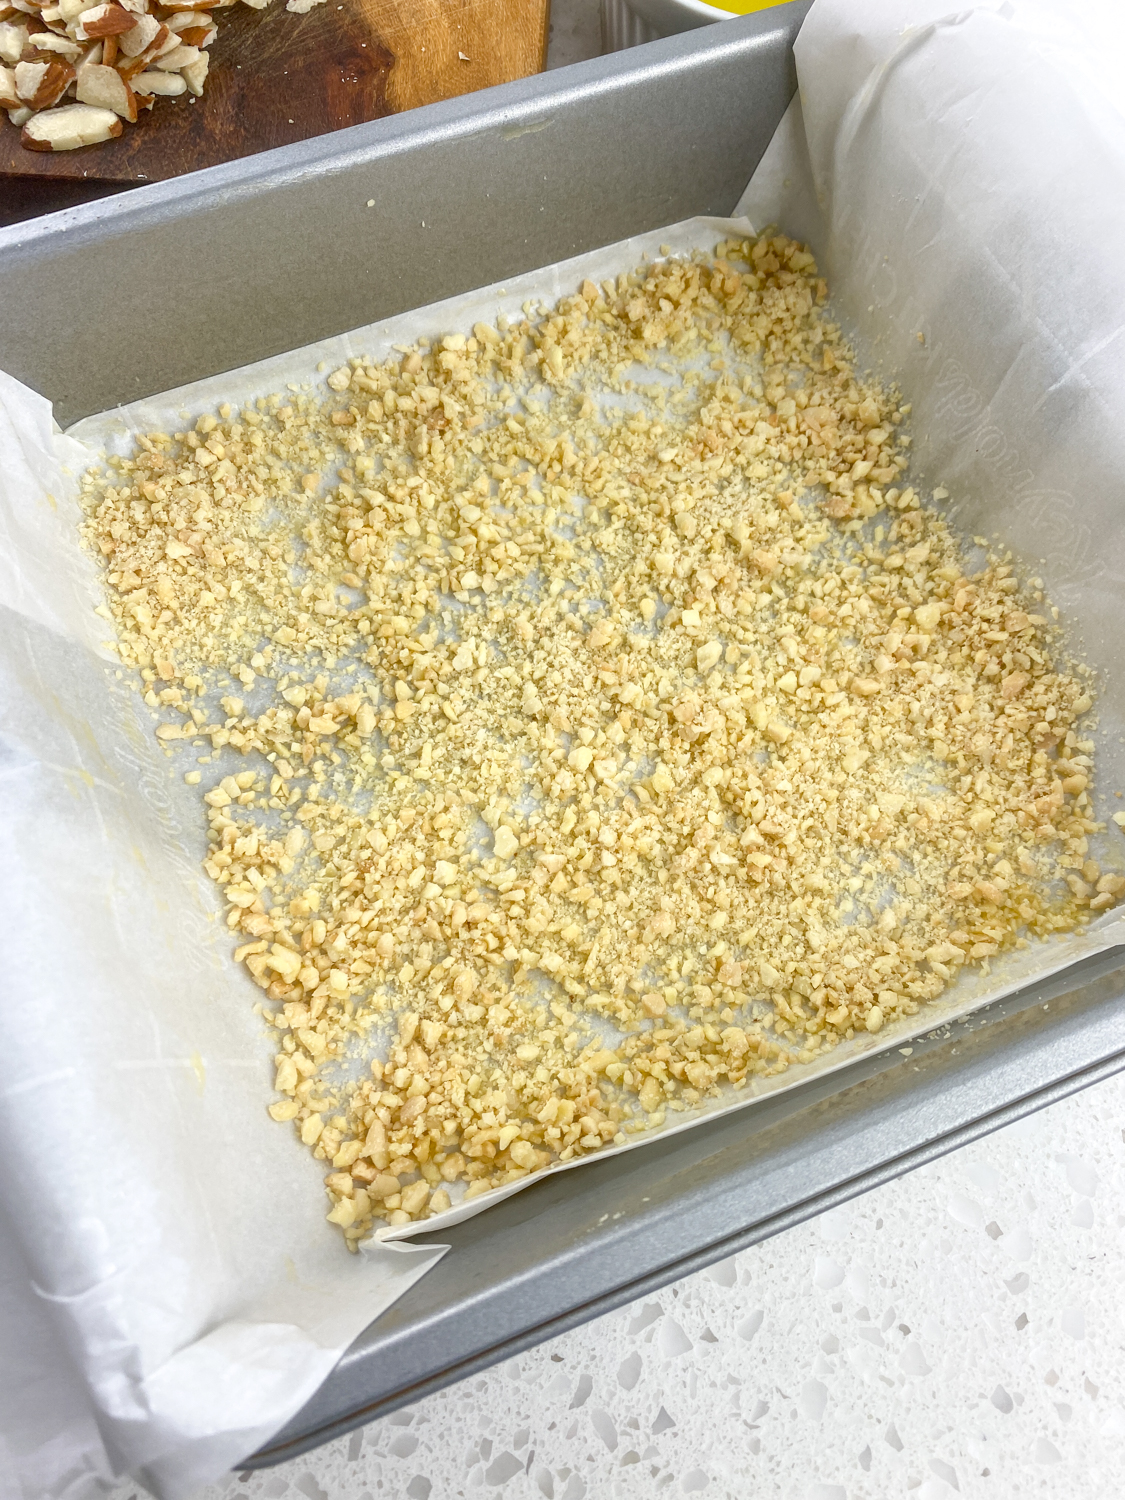 Butter melted over the parchment and a layer of ground almonds sprinkled over.